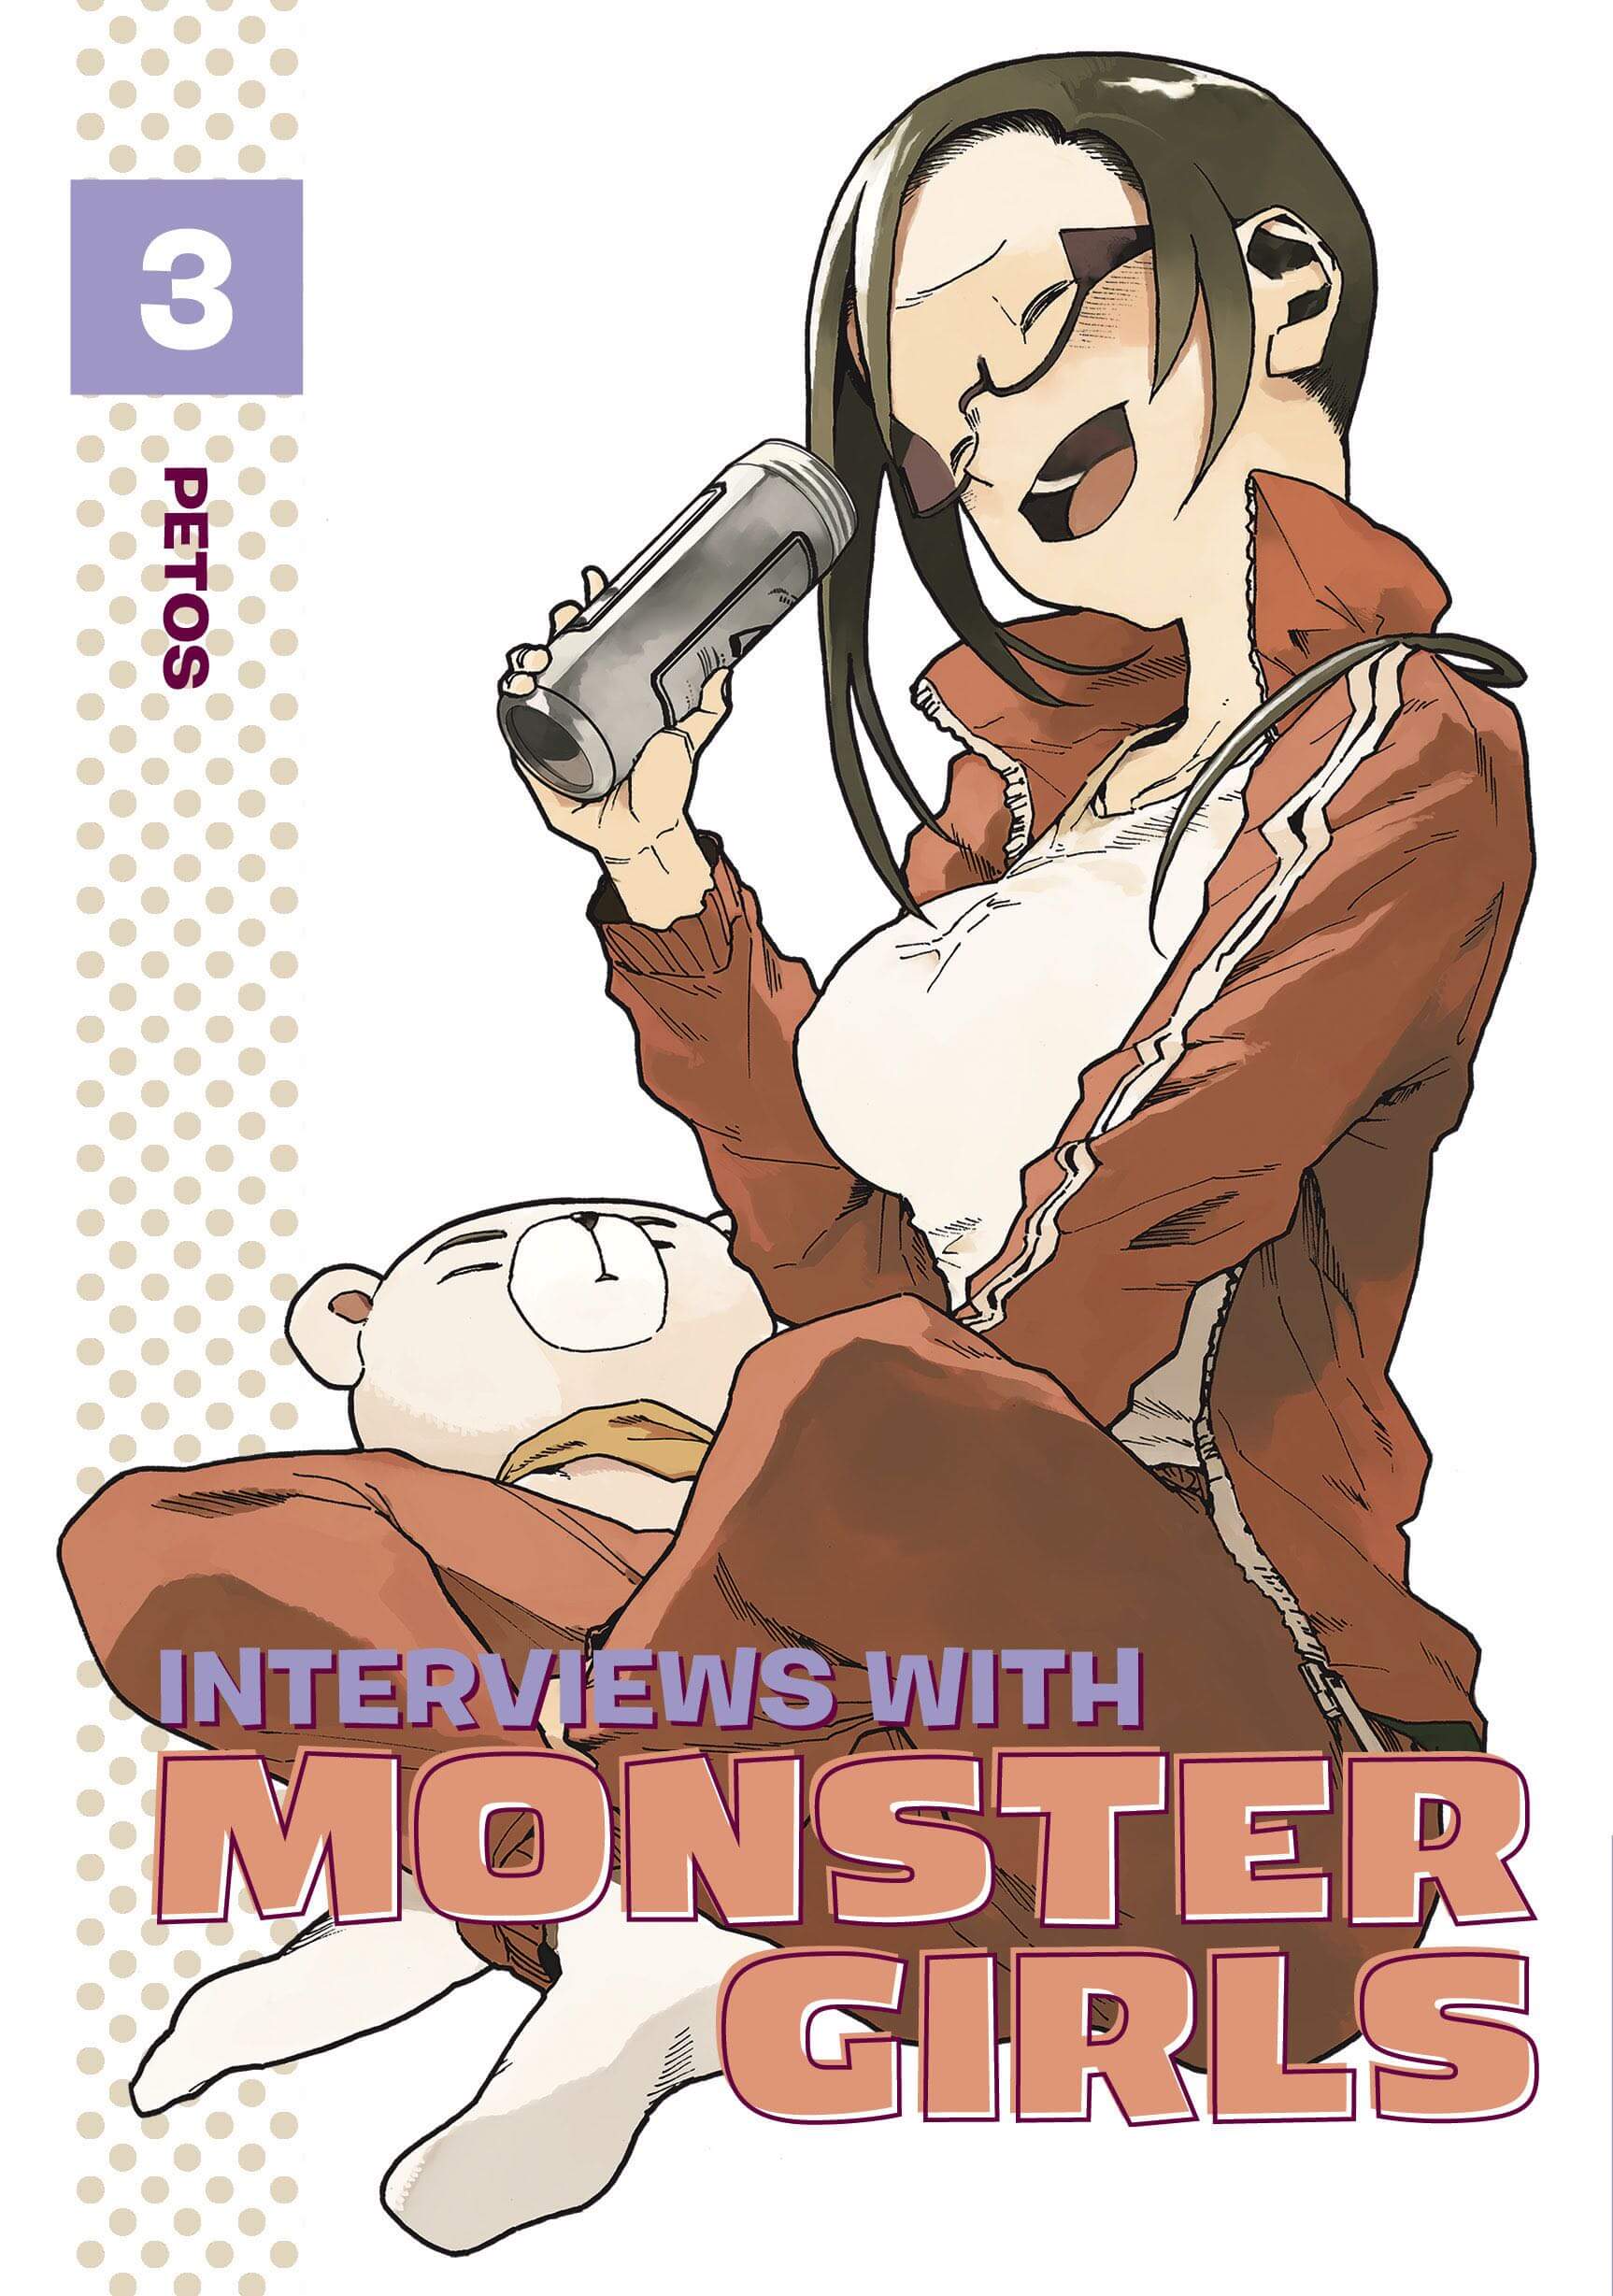 Interviews With Monster Girls #9